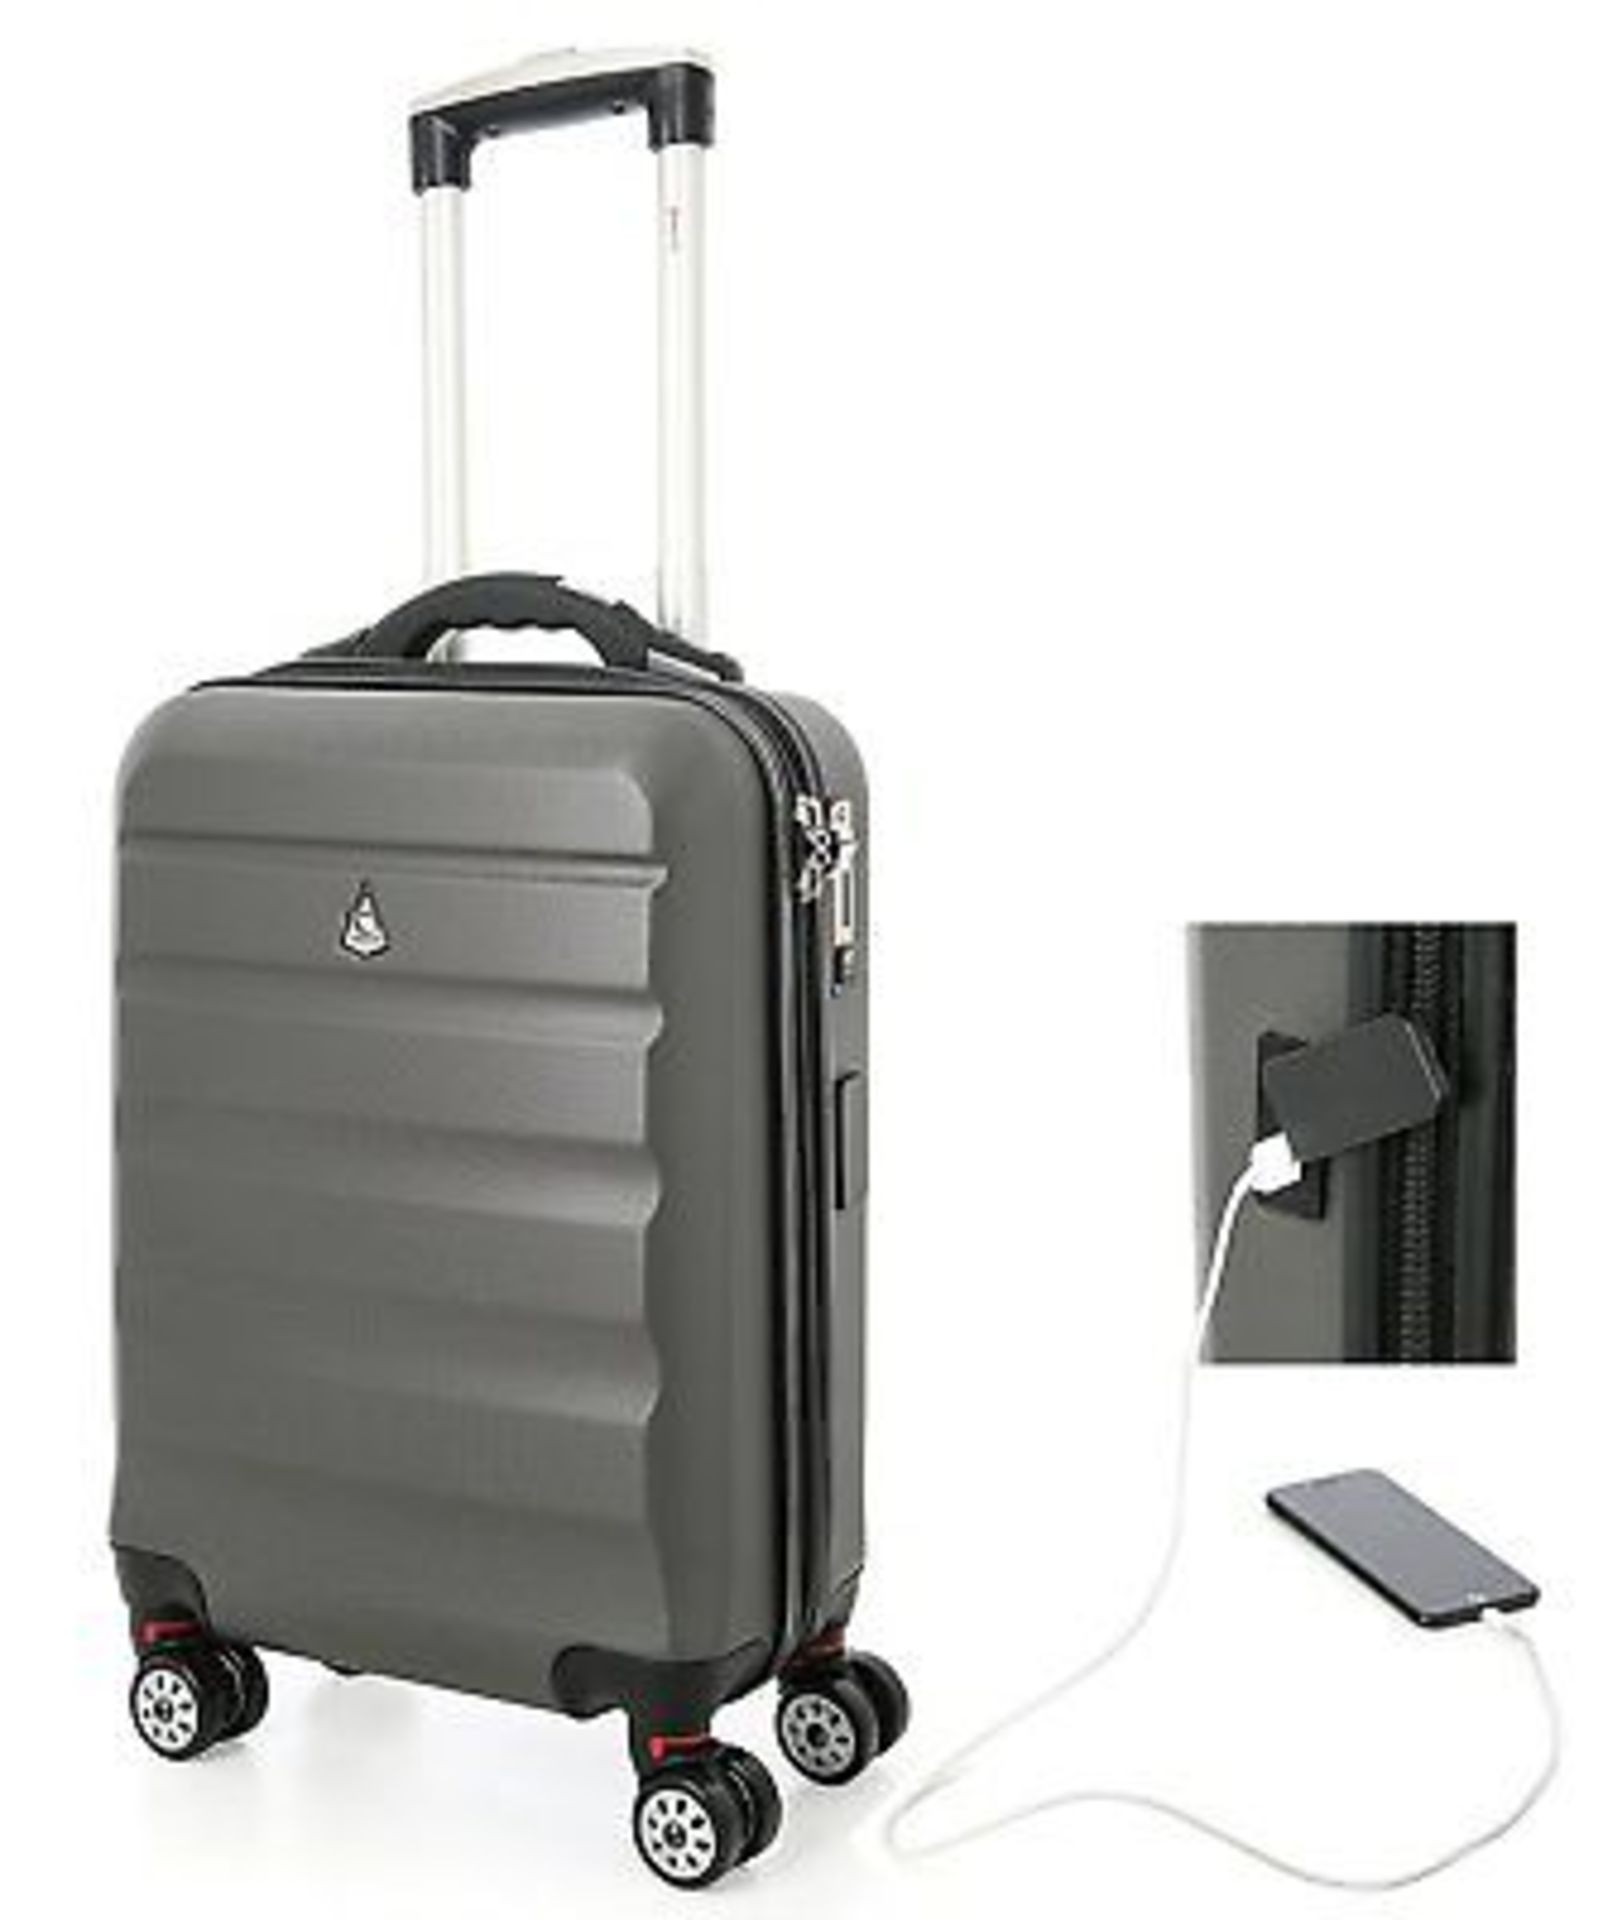 V Brand New Smart 21 Inch Suitcase/Cabin Case With Charging Facilities - Ebay Price £49.99 - 33L - Image 3 of 5